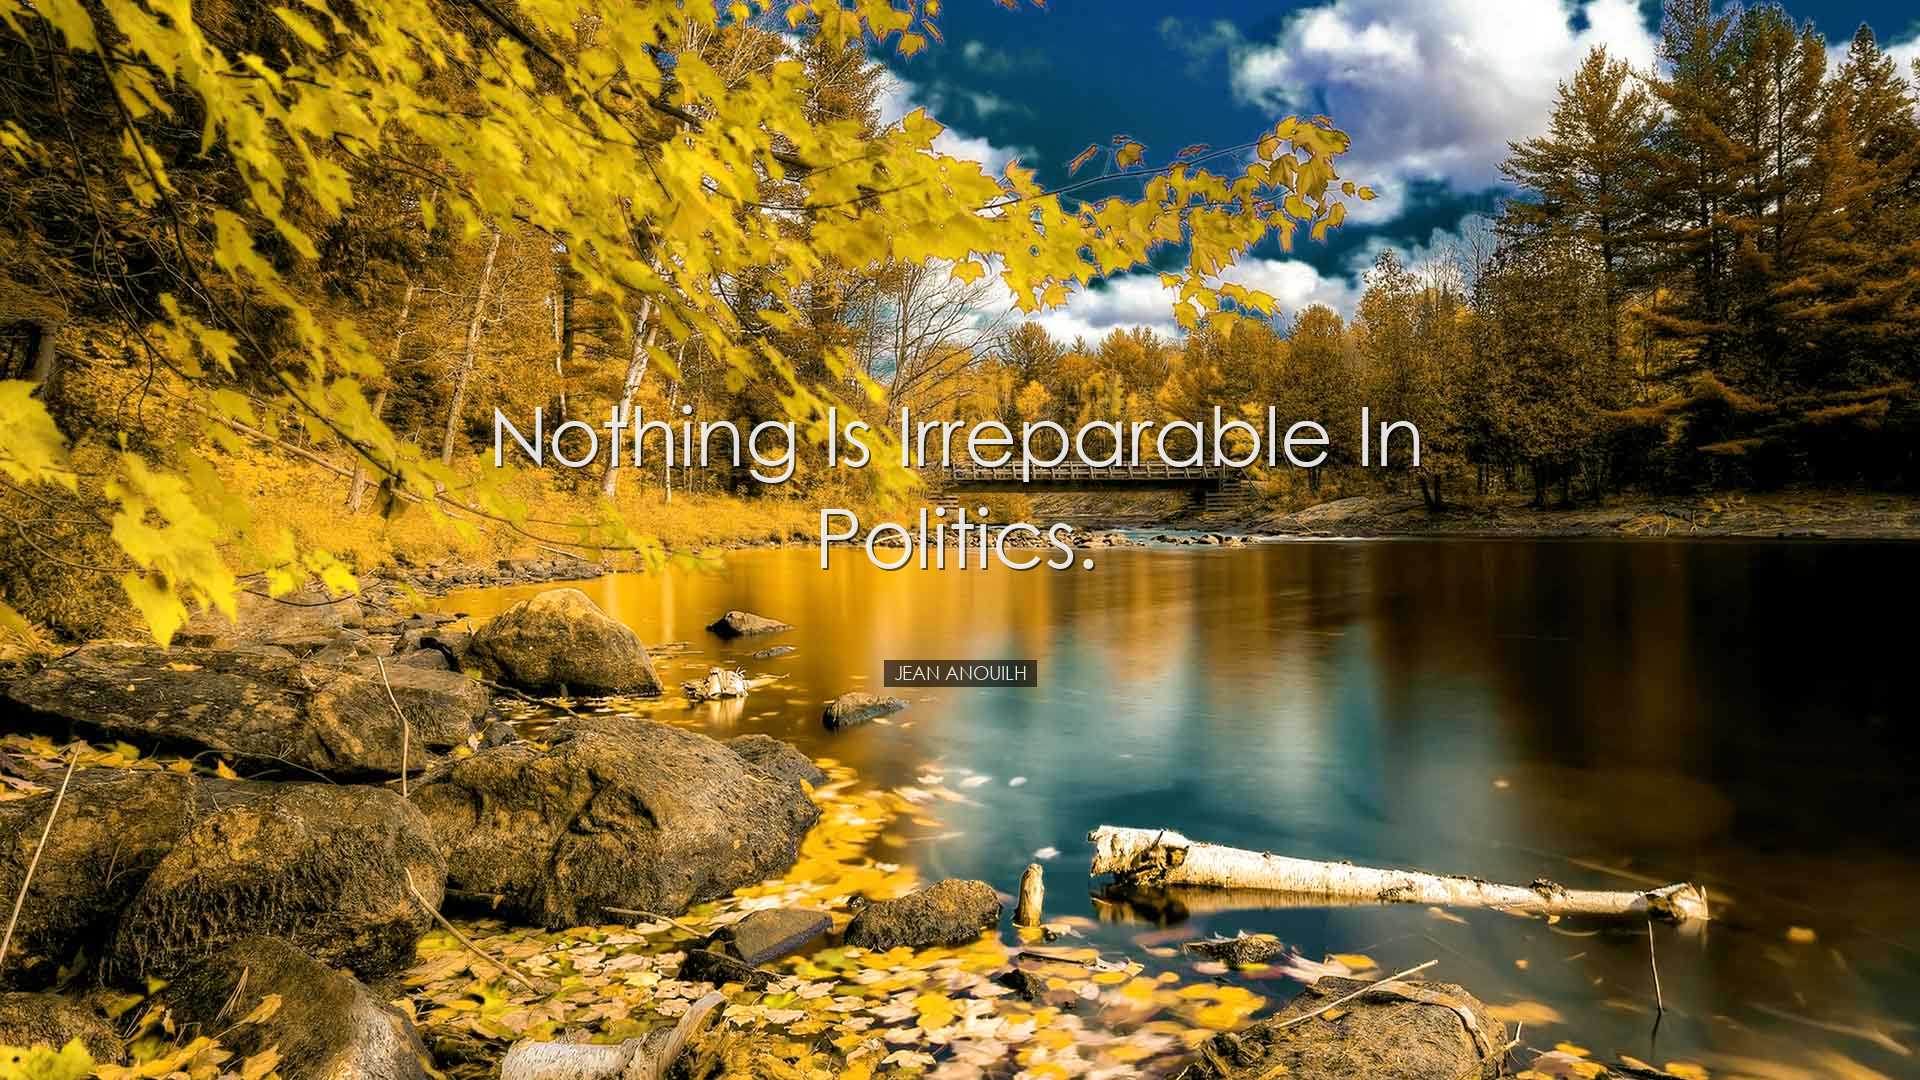 Nothing is irreparable in politics. - Jean Anouilh